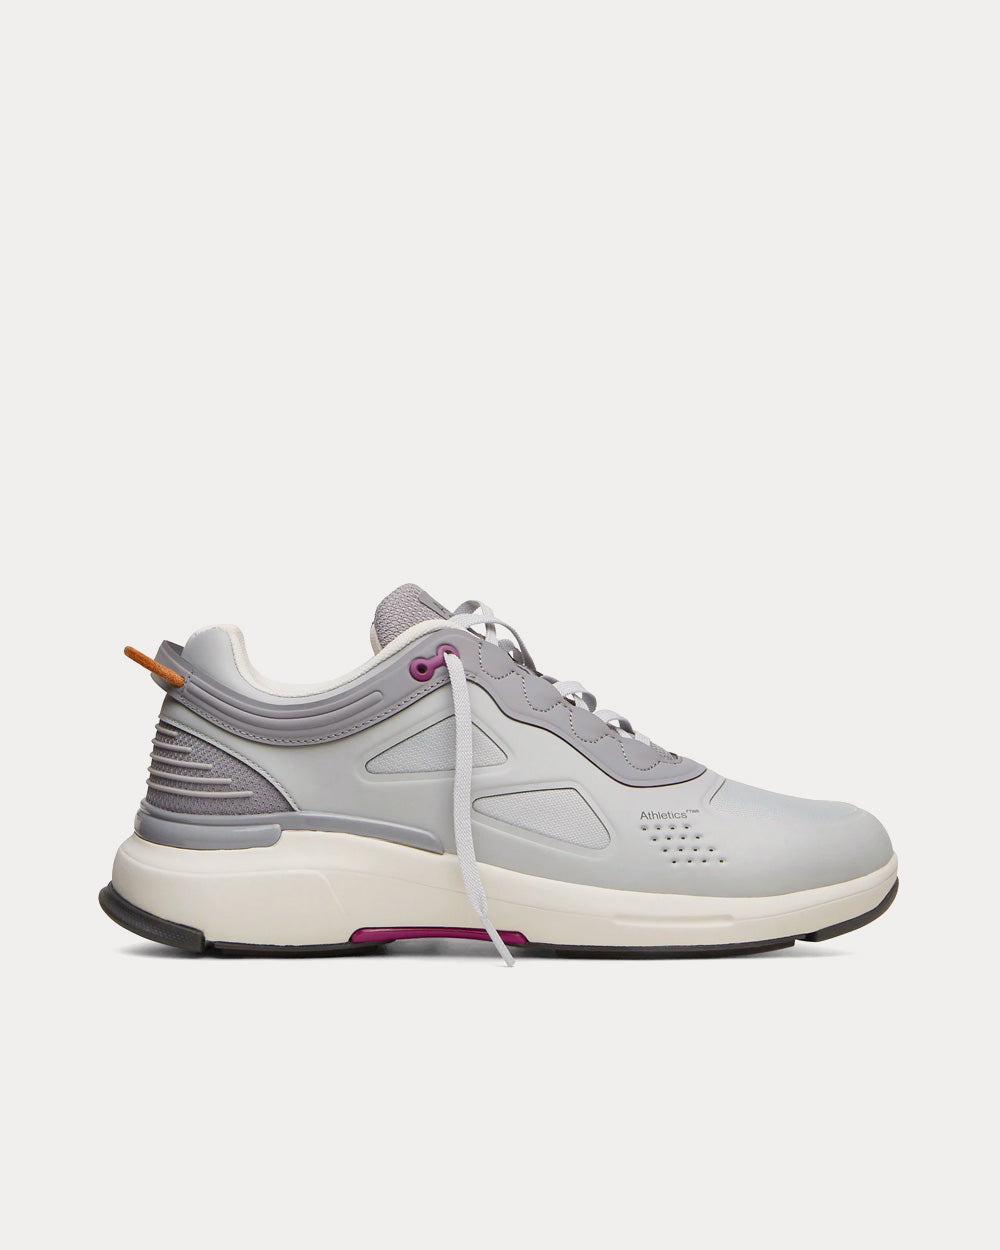 Athletics FTWR - ONE.2 Grey / Formal Grey / G3 Grape Low Top Sneakers